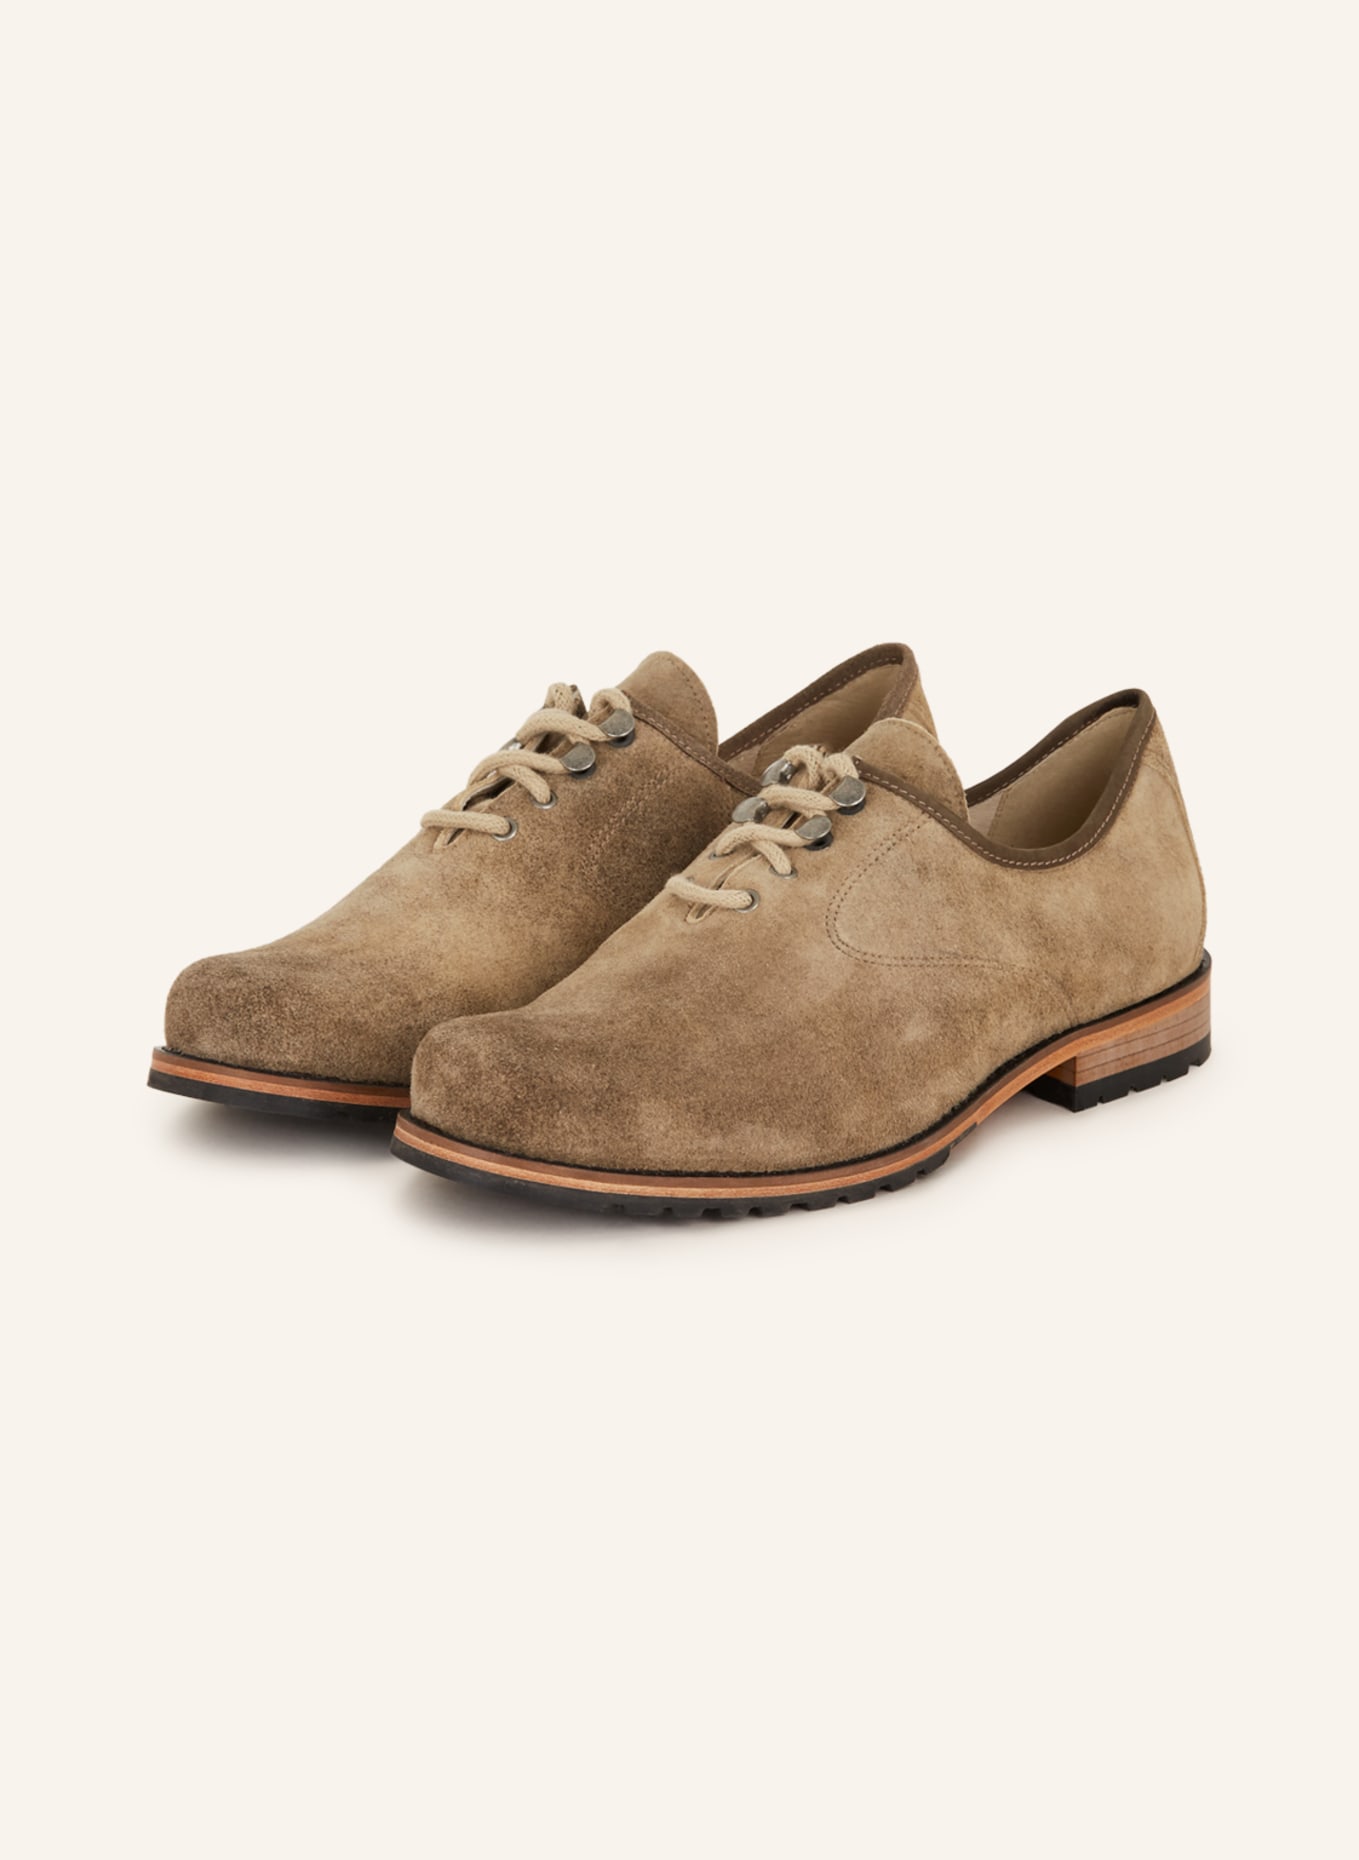 OSTARRICHI Haferl shoes, Color: LIGHT BROWN (Image 1)